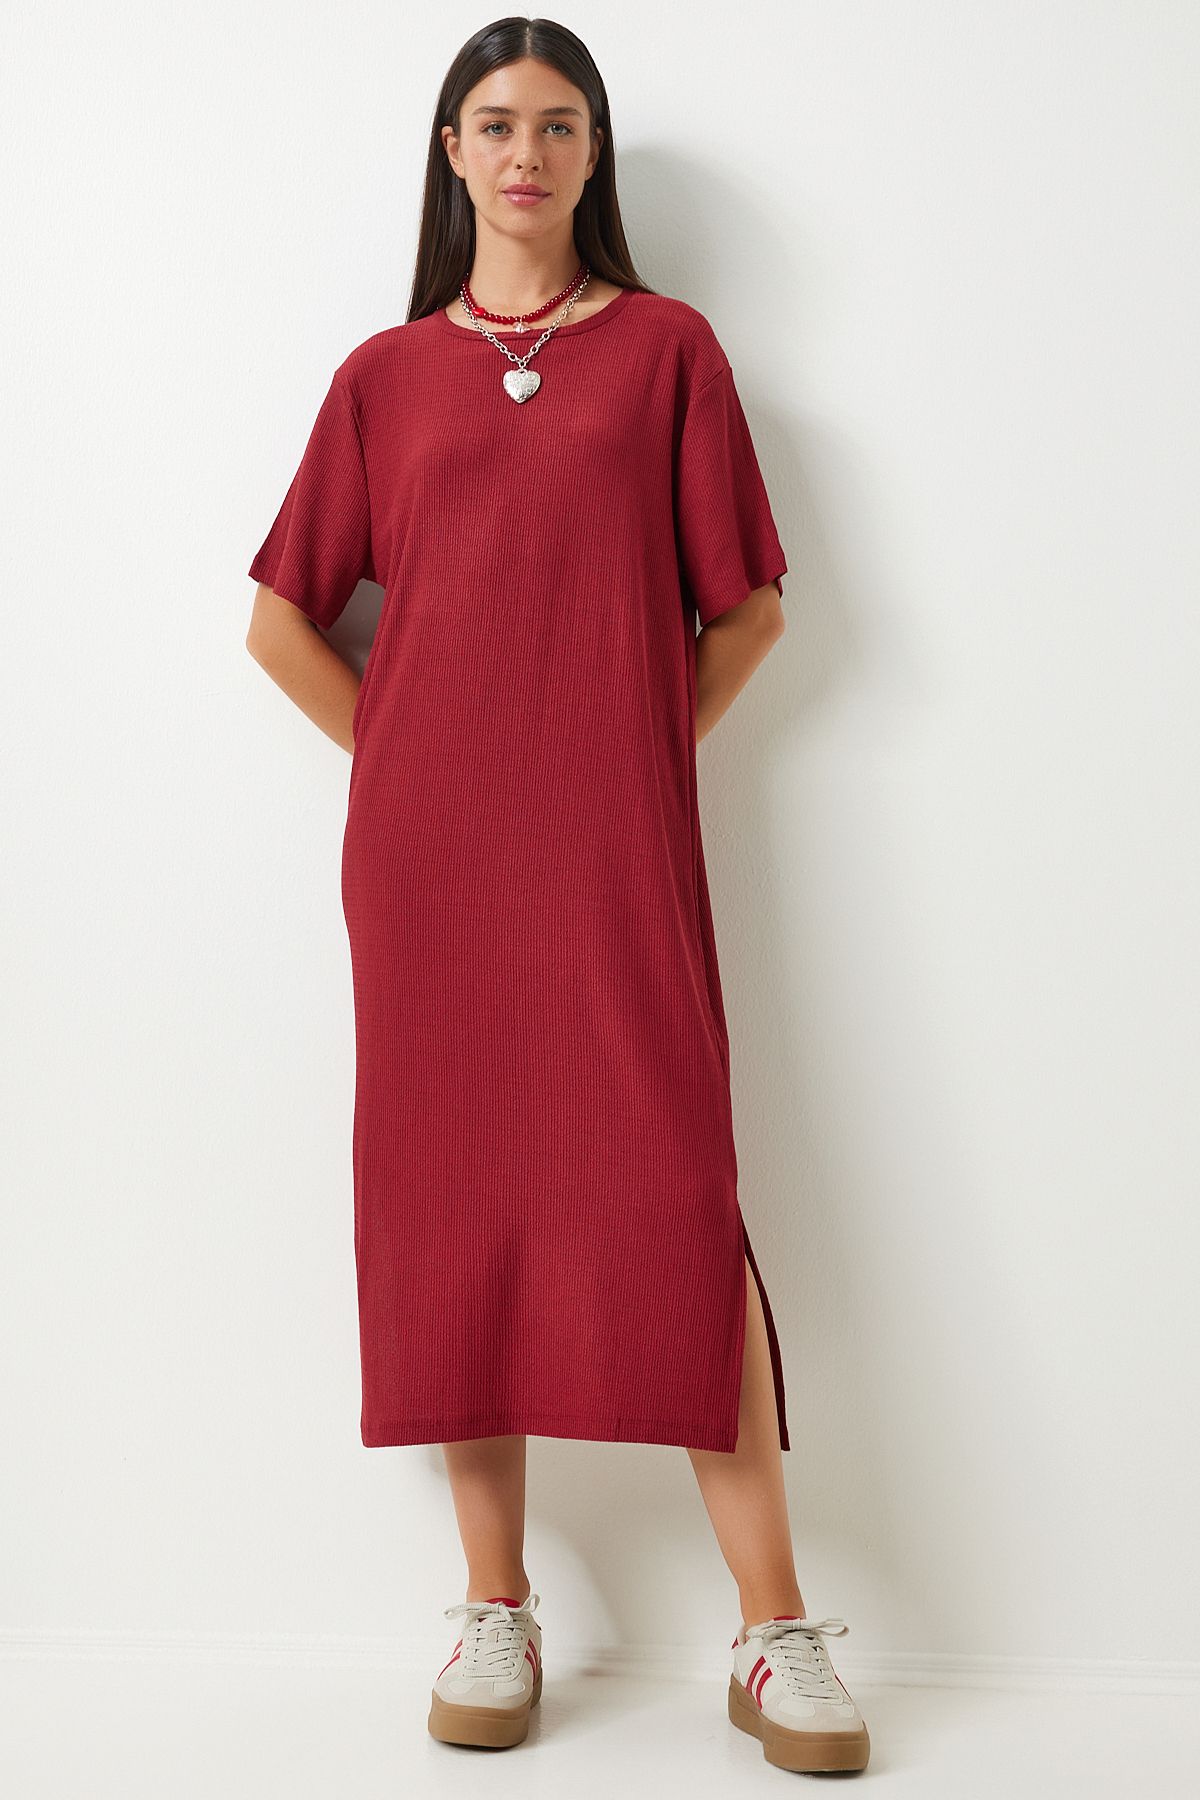 Happiness İstanbul Women's Burgundy Loose Long Daily Summer Knitted Dress